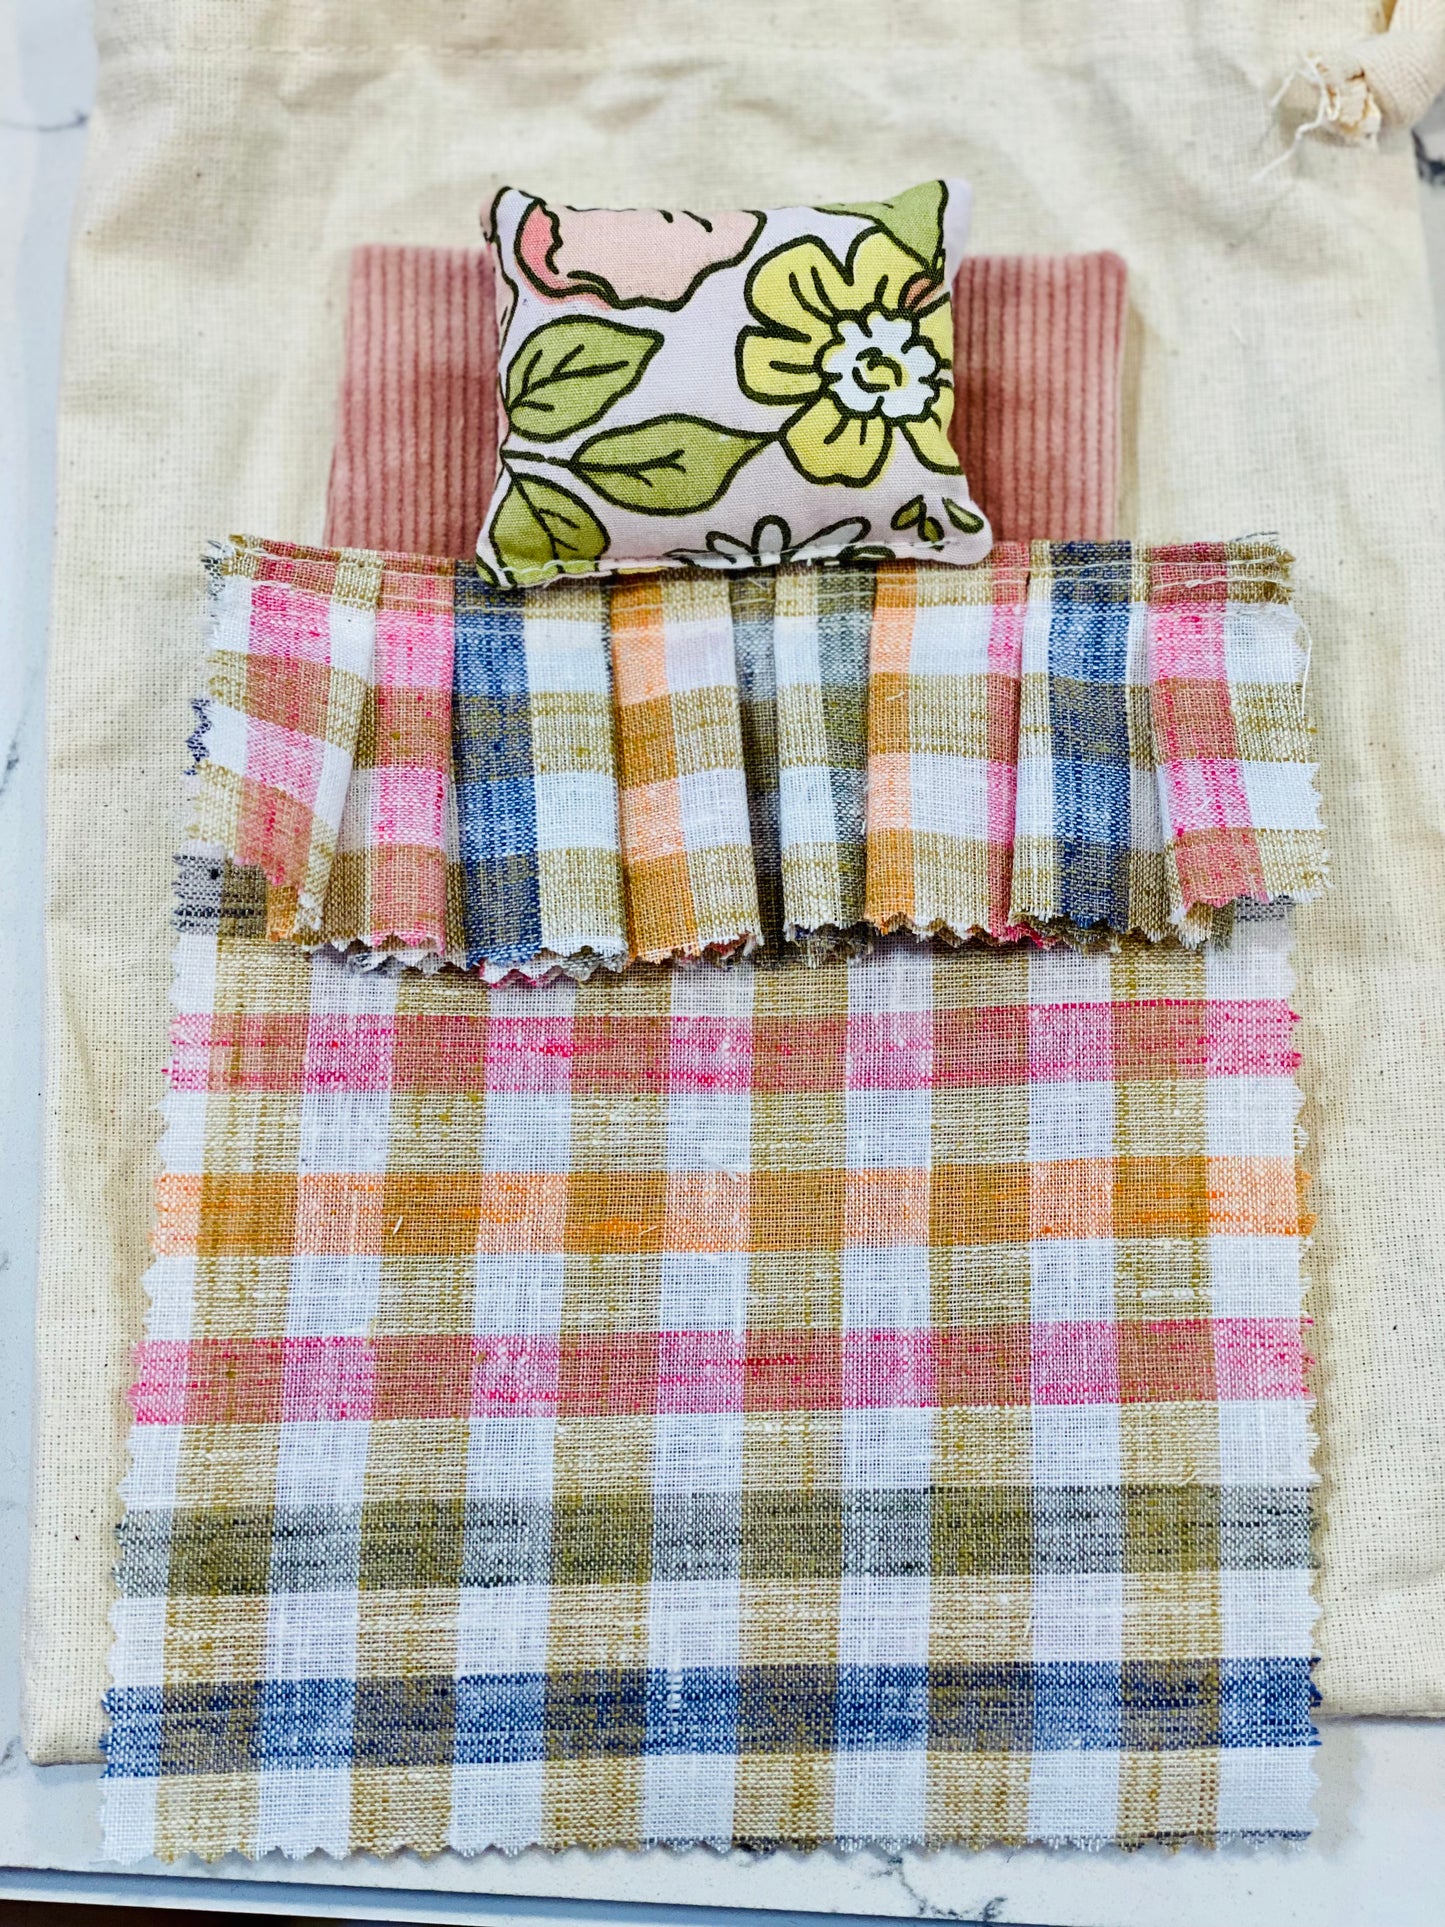 example of doll bedding, each will vary in colour and pattern